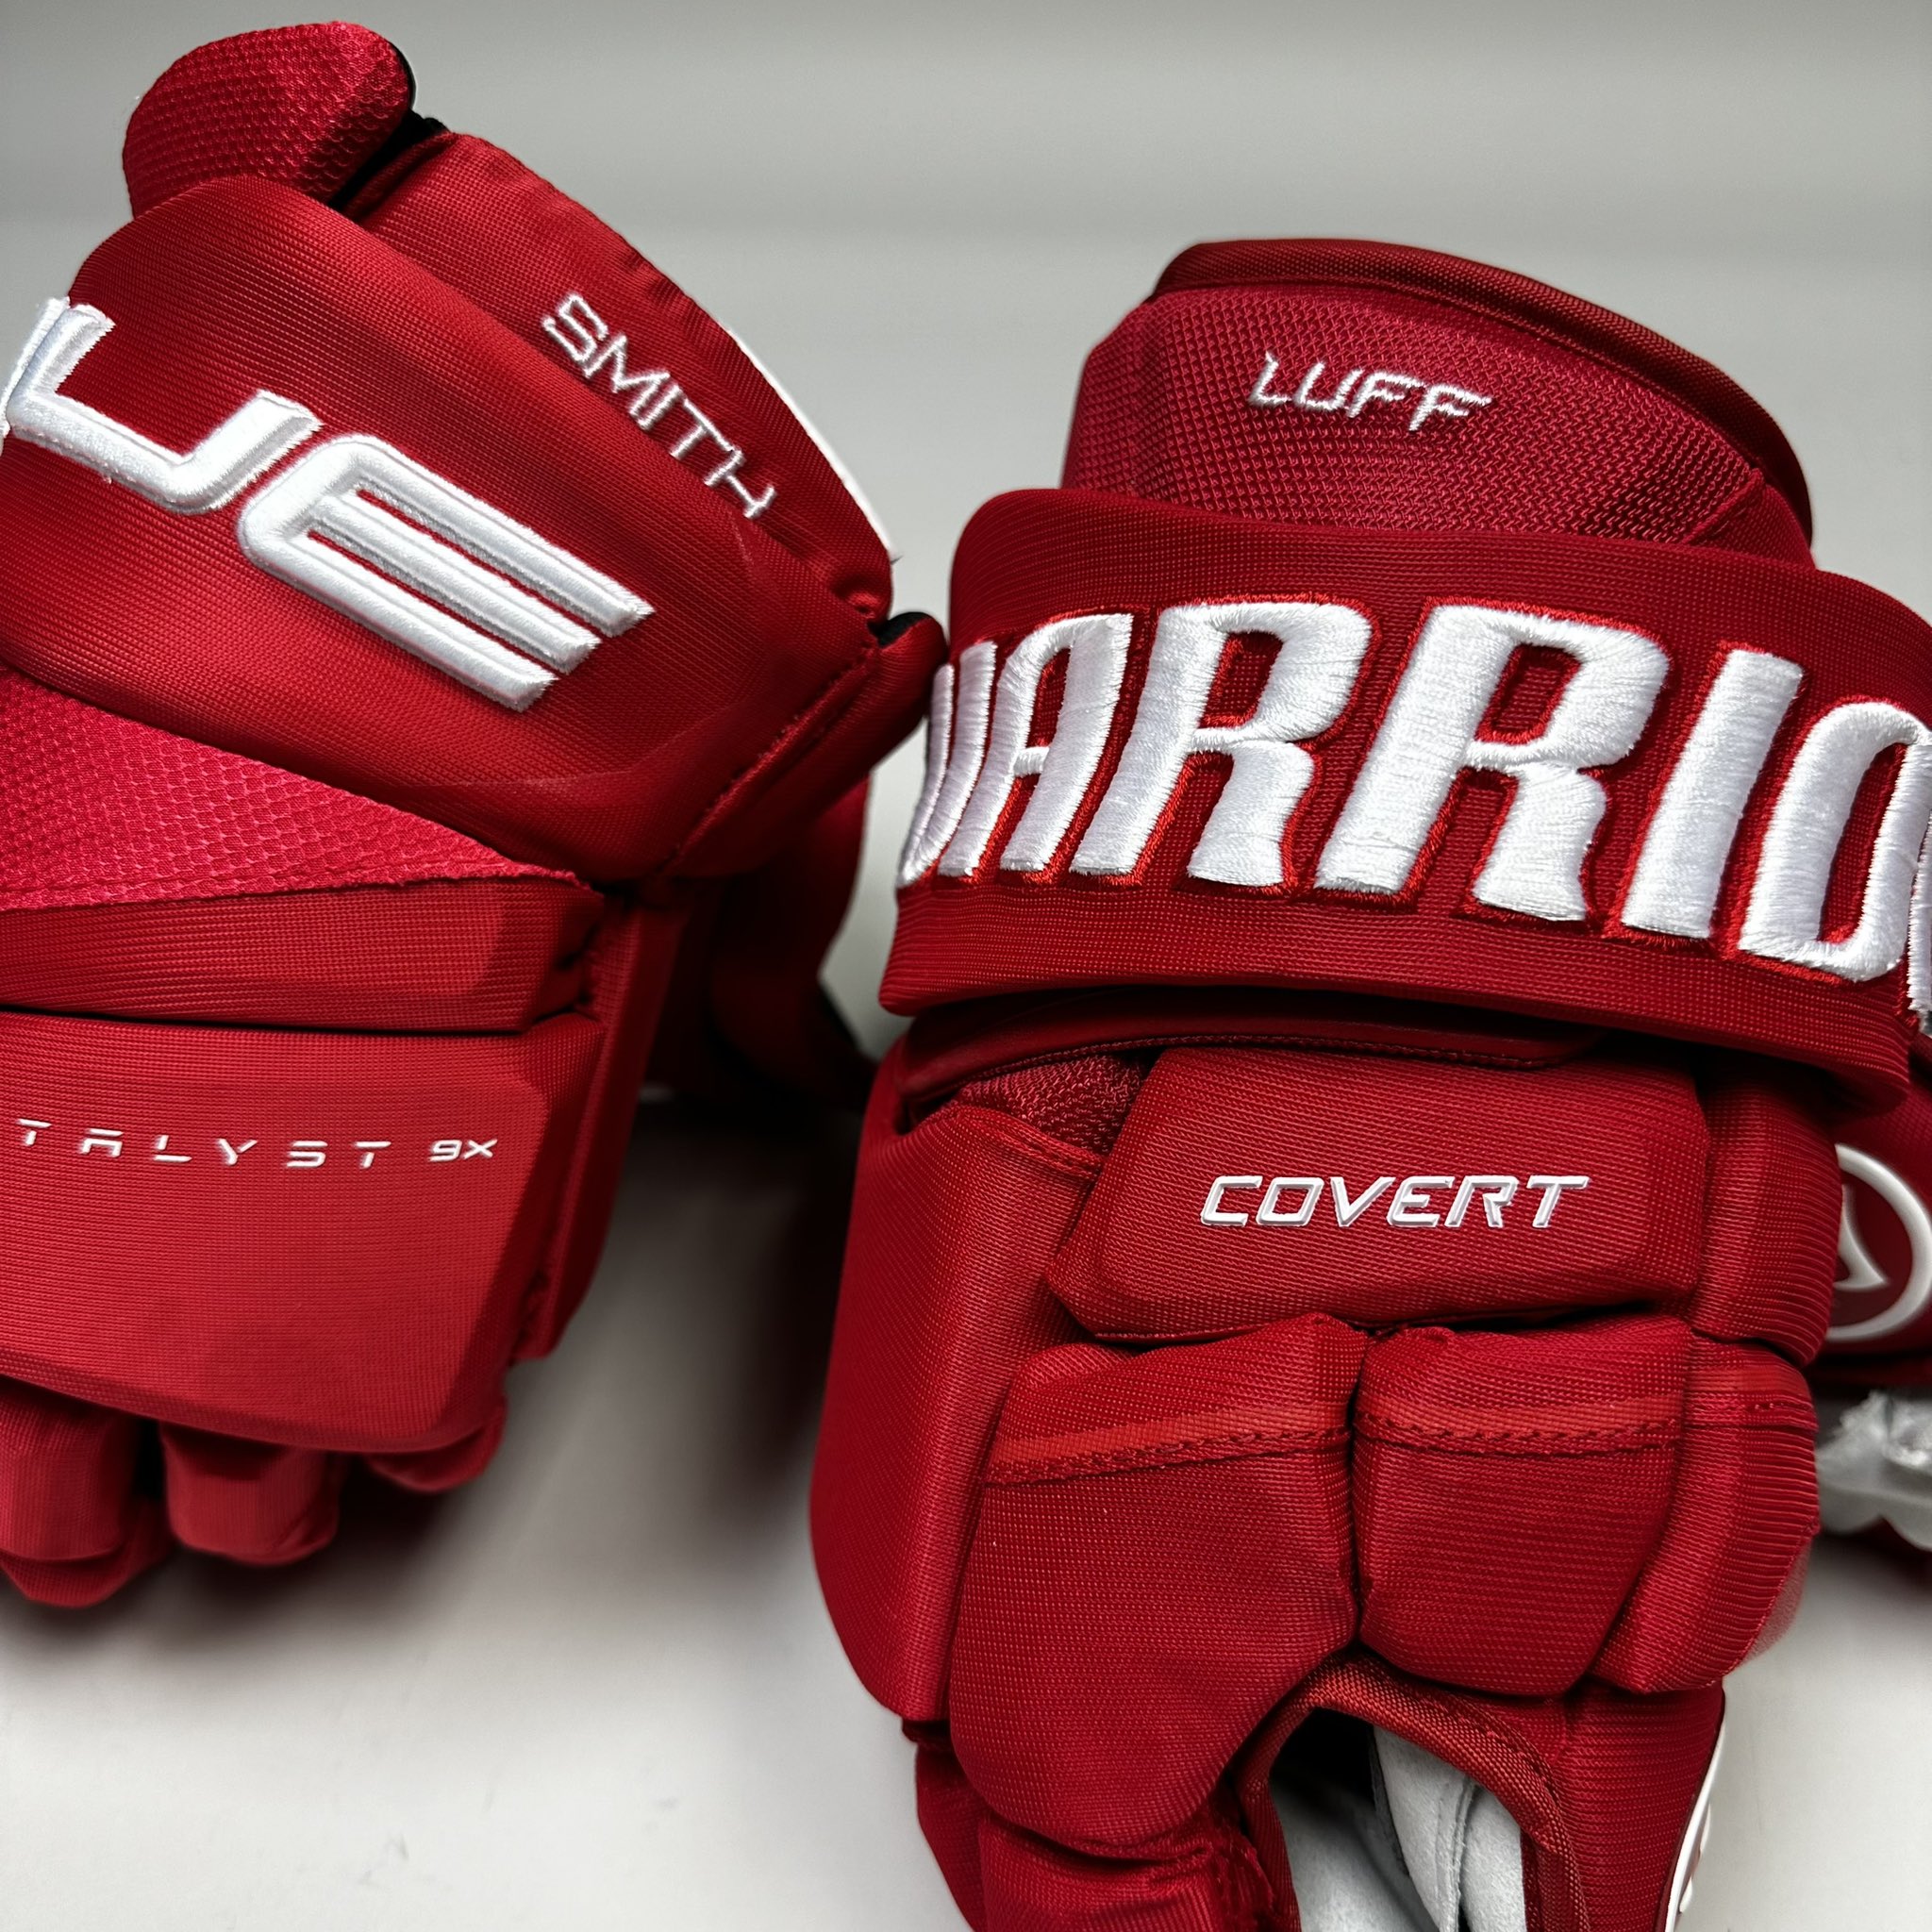 Gear Geek - Can you guess this NHL player based solely on